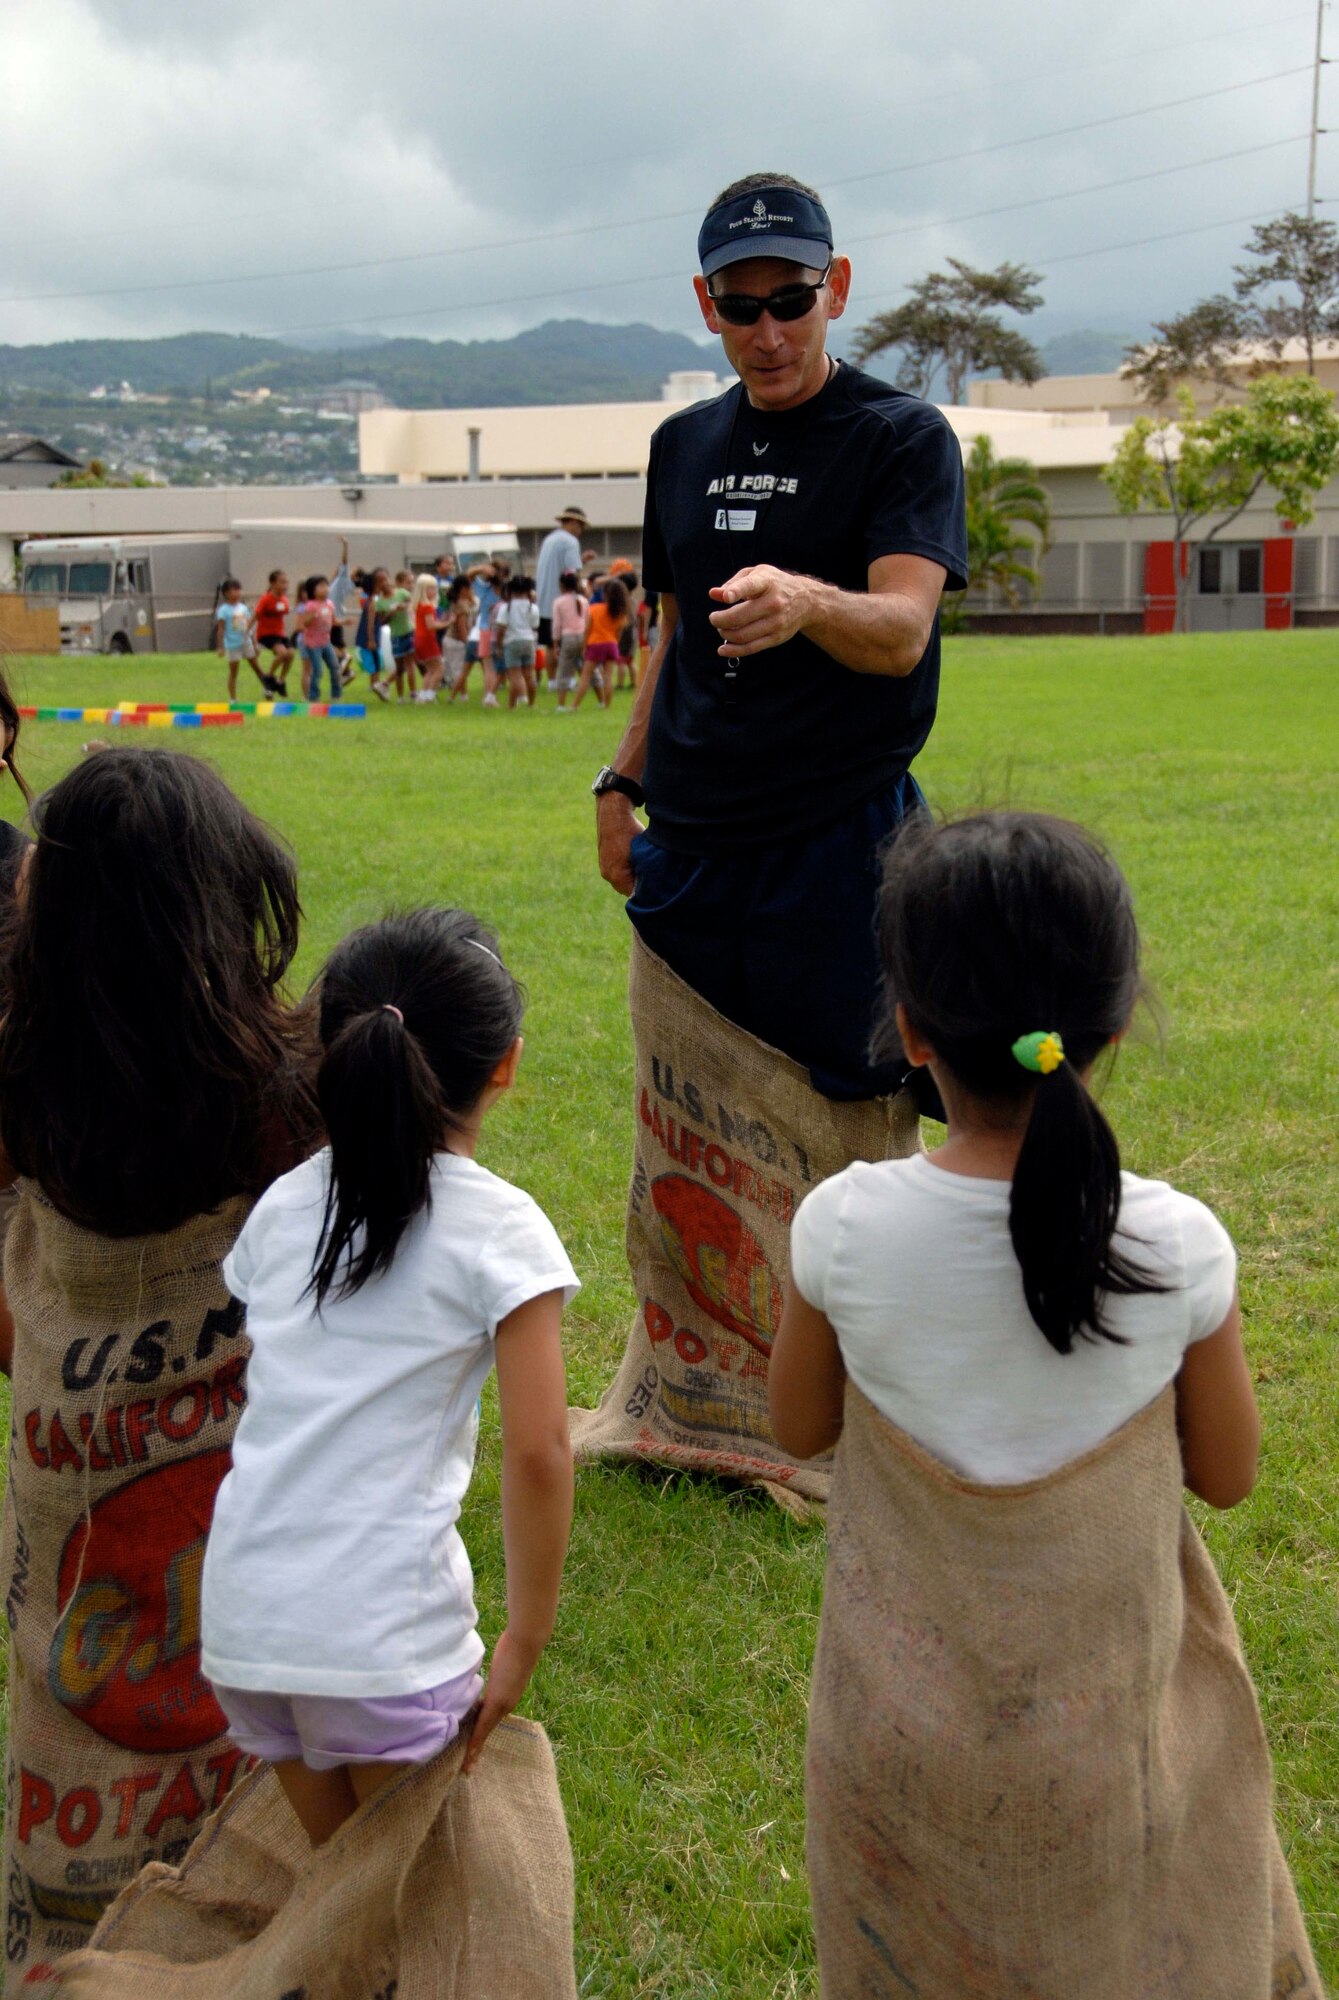 Master Sgt. Steve Adachi, 624th Regional Support Group safety manager, explains to his charges the safe and proper method of potato sack racing at Makalapa Elementary School's Field Day, May 28-29. The 624th RSG has been involved with Makalapa since 2004 as part of the Hickam School Partnership program. (U.S. Air Force photo/Staff Sgt. Jennie Chamberlin)